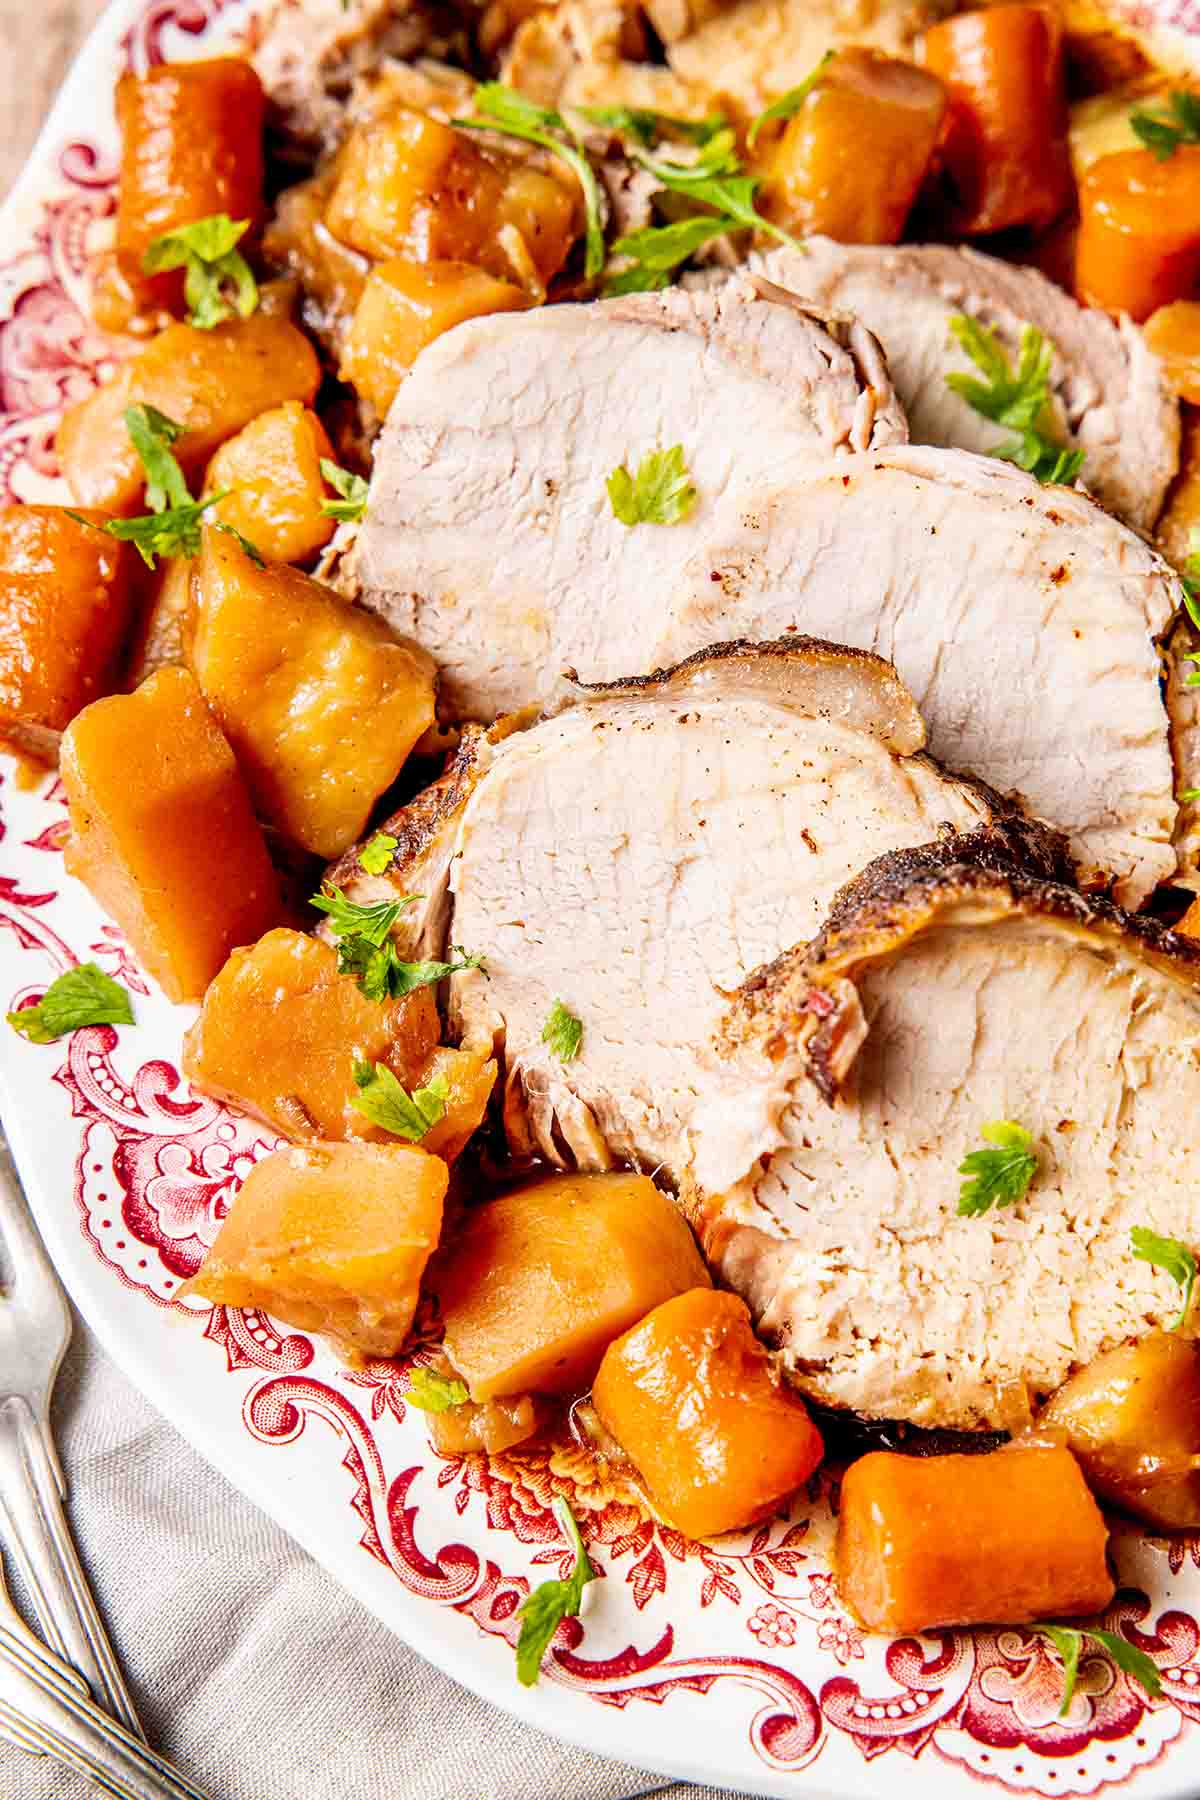 instant pot pork roast with carrots and potatoes.